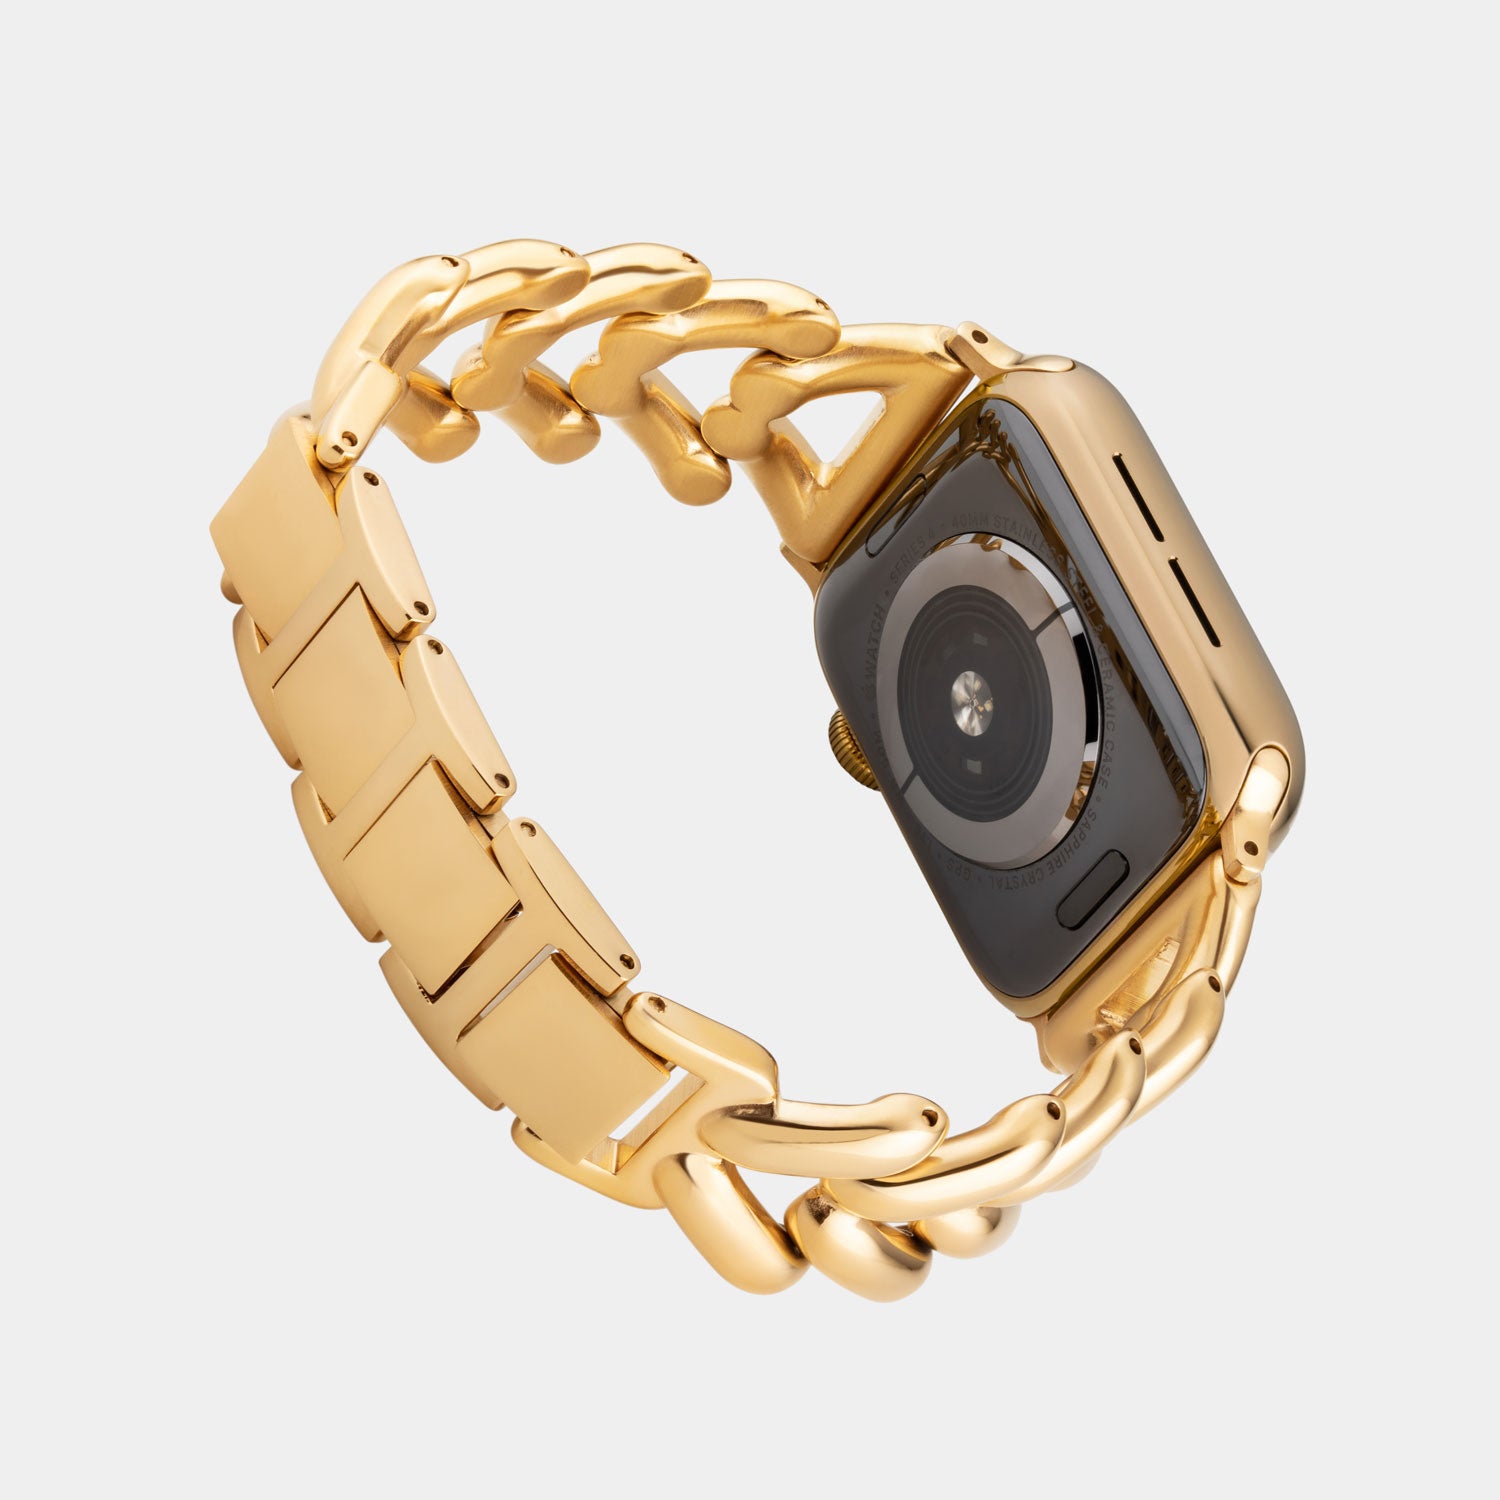 Rear of Gold Heart Shaped Apple Watch Strap by Buckle & Band